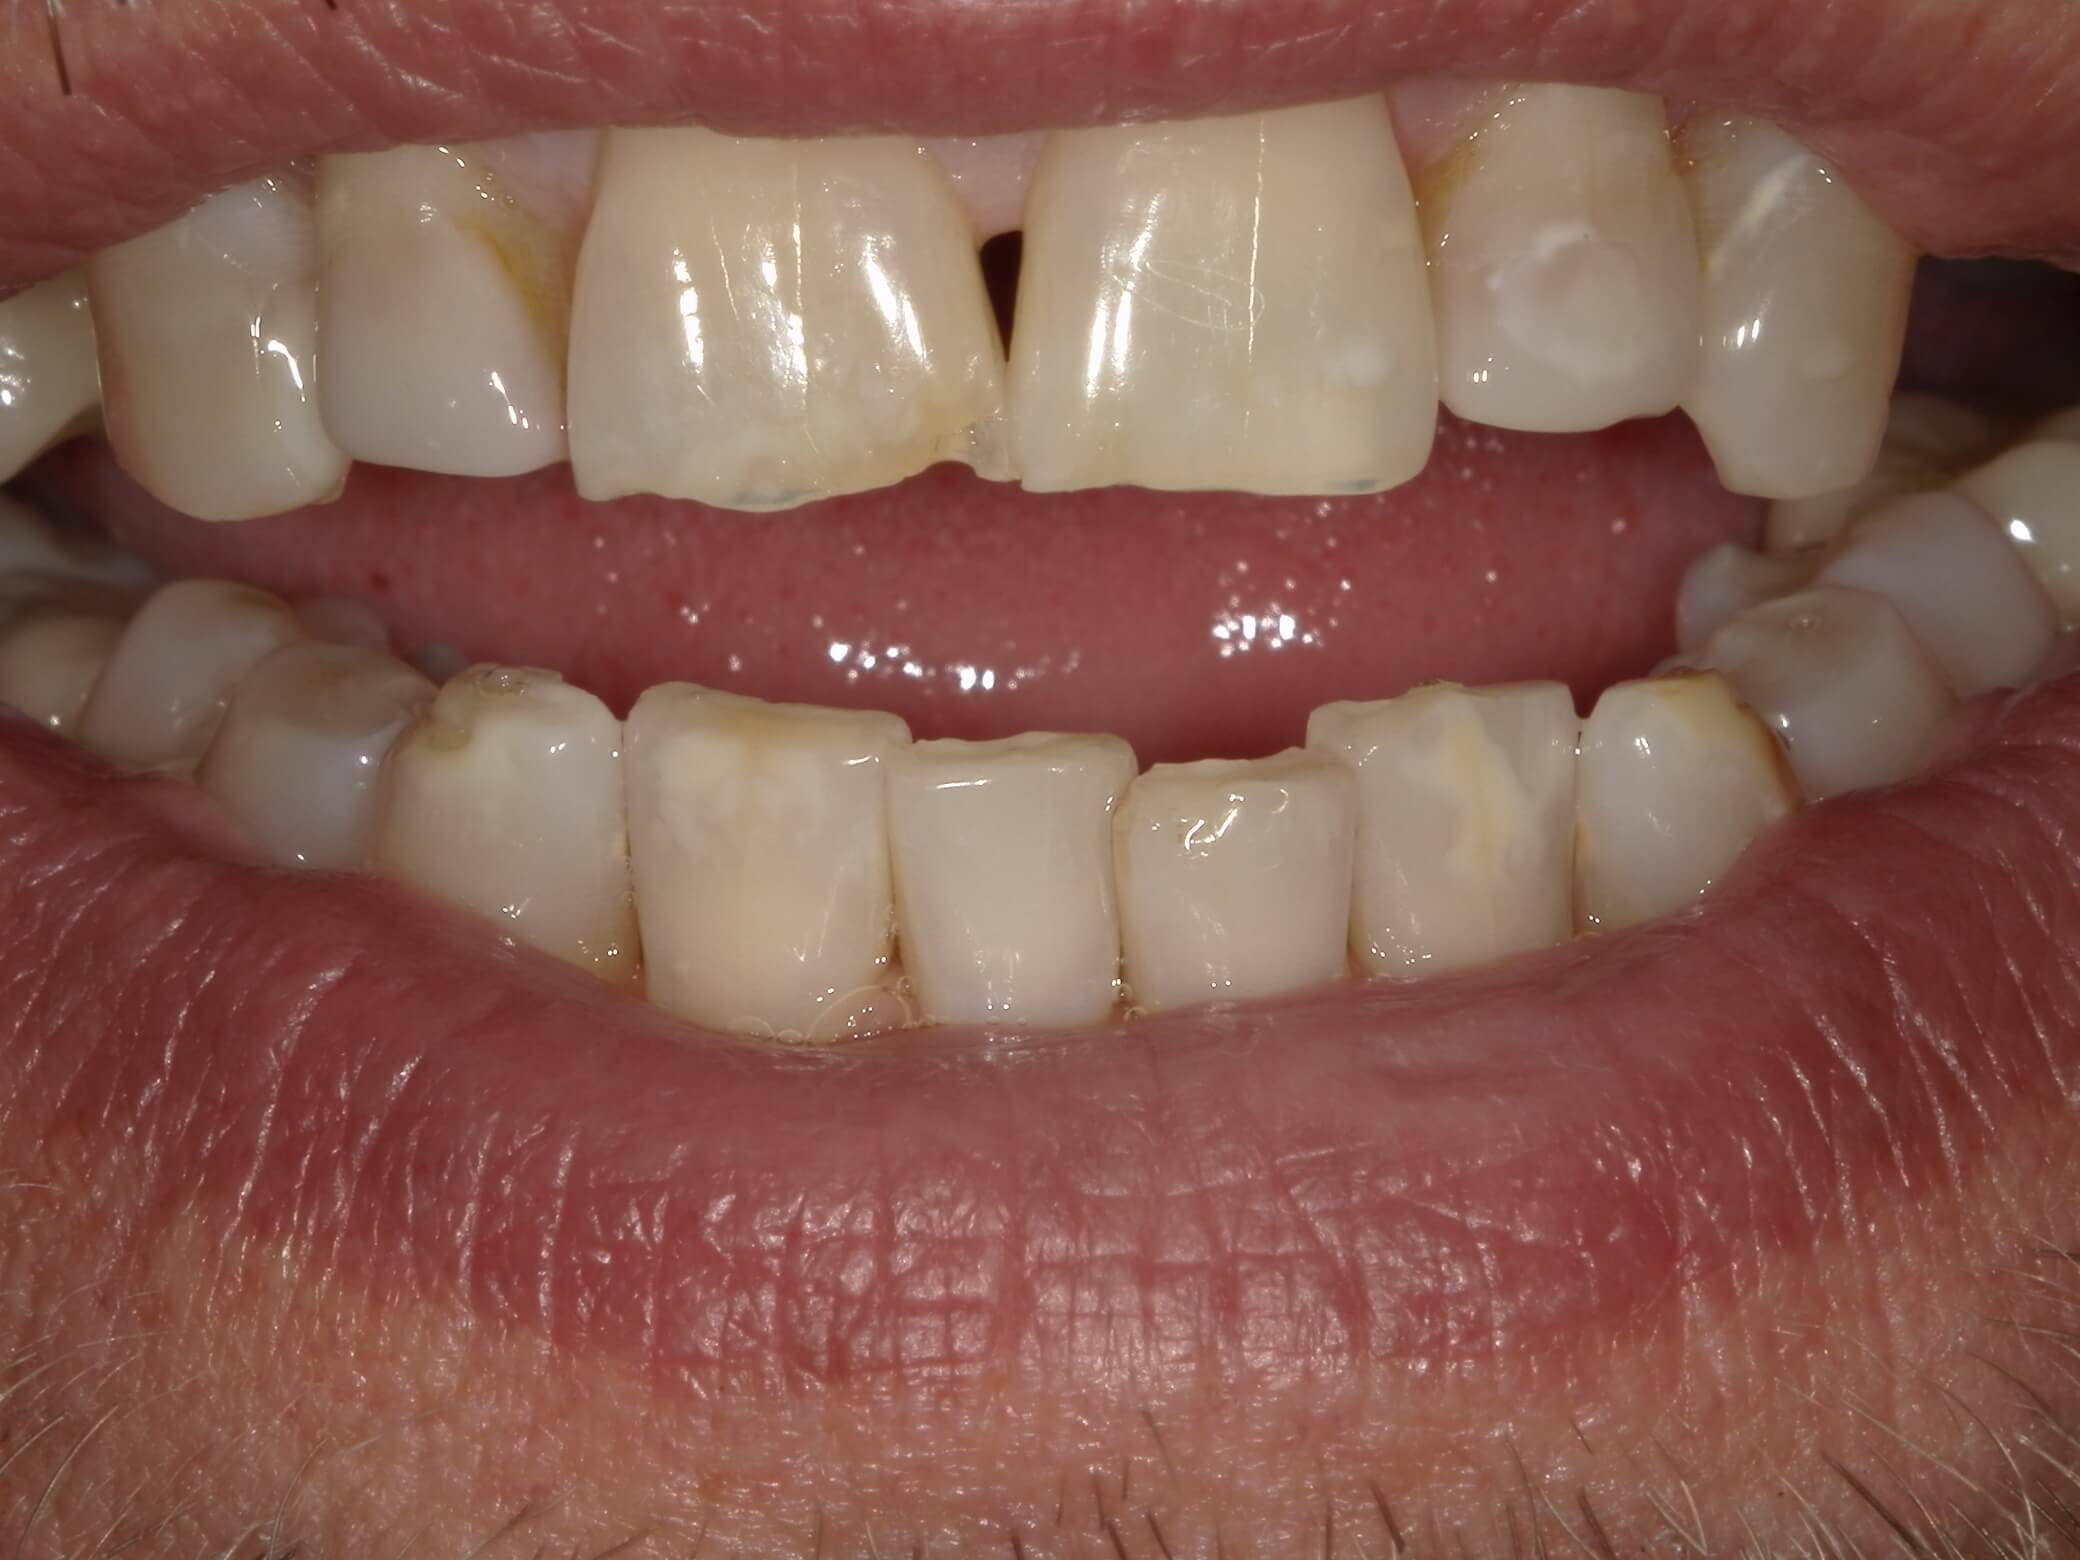 Before close-up photo of chipped teeth